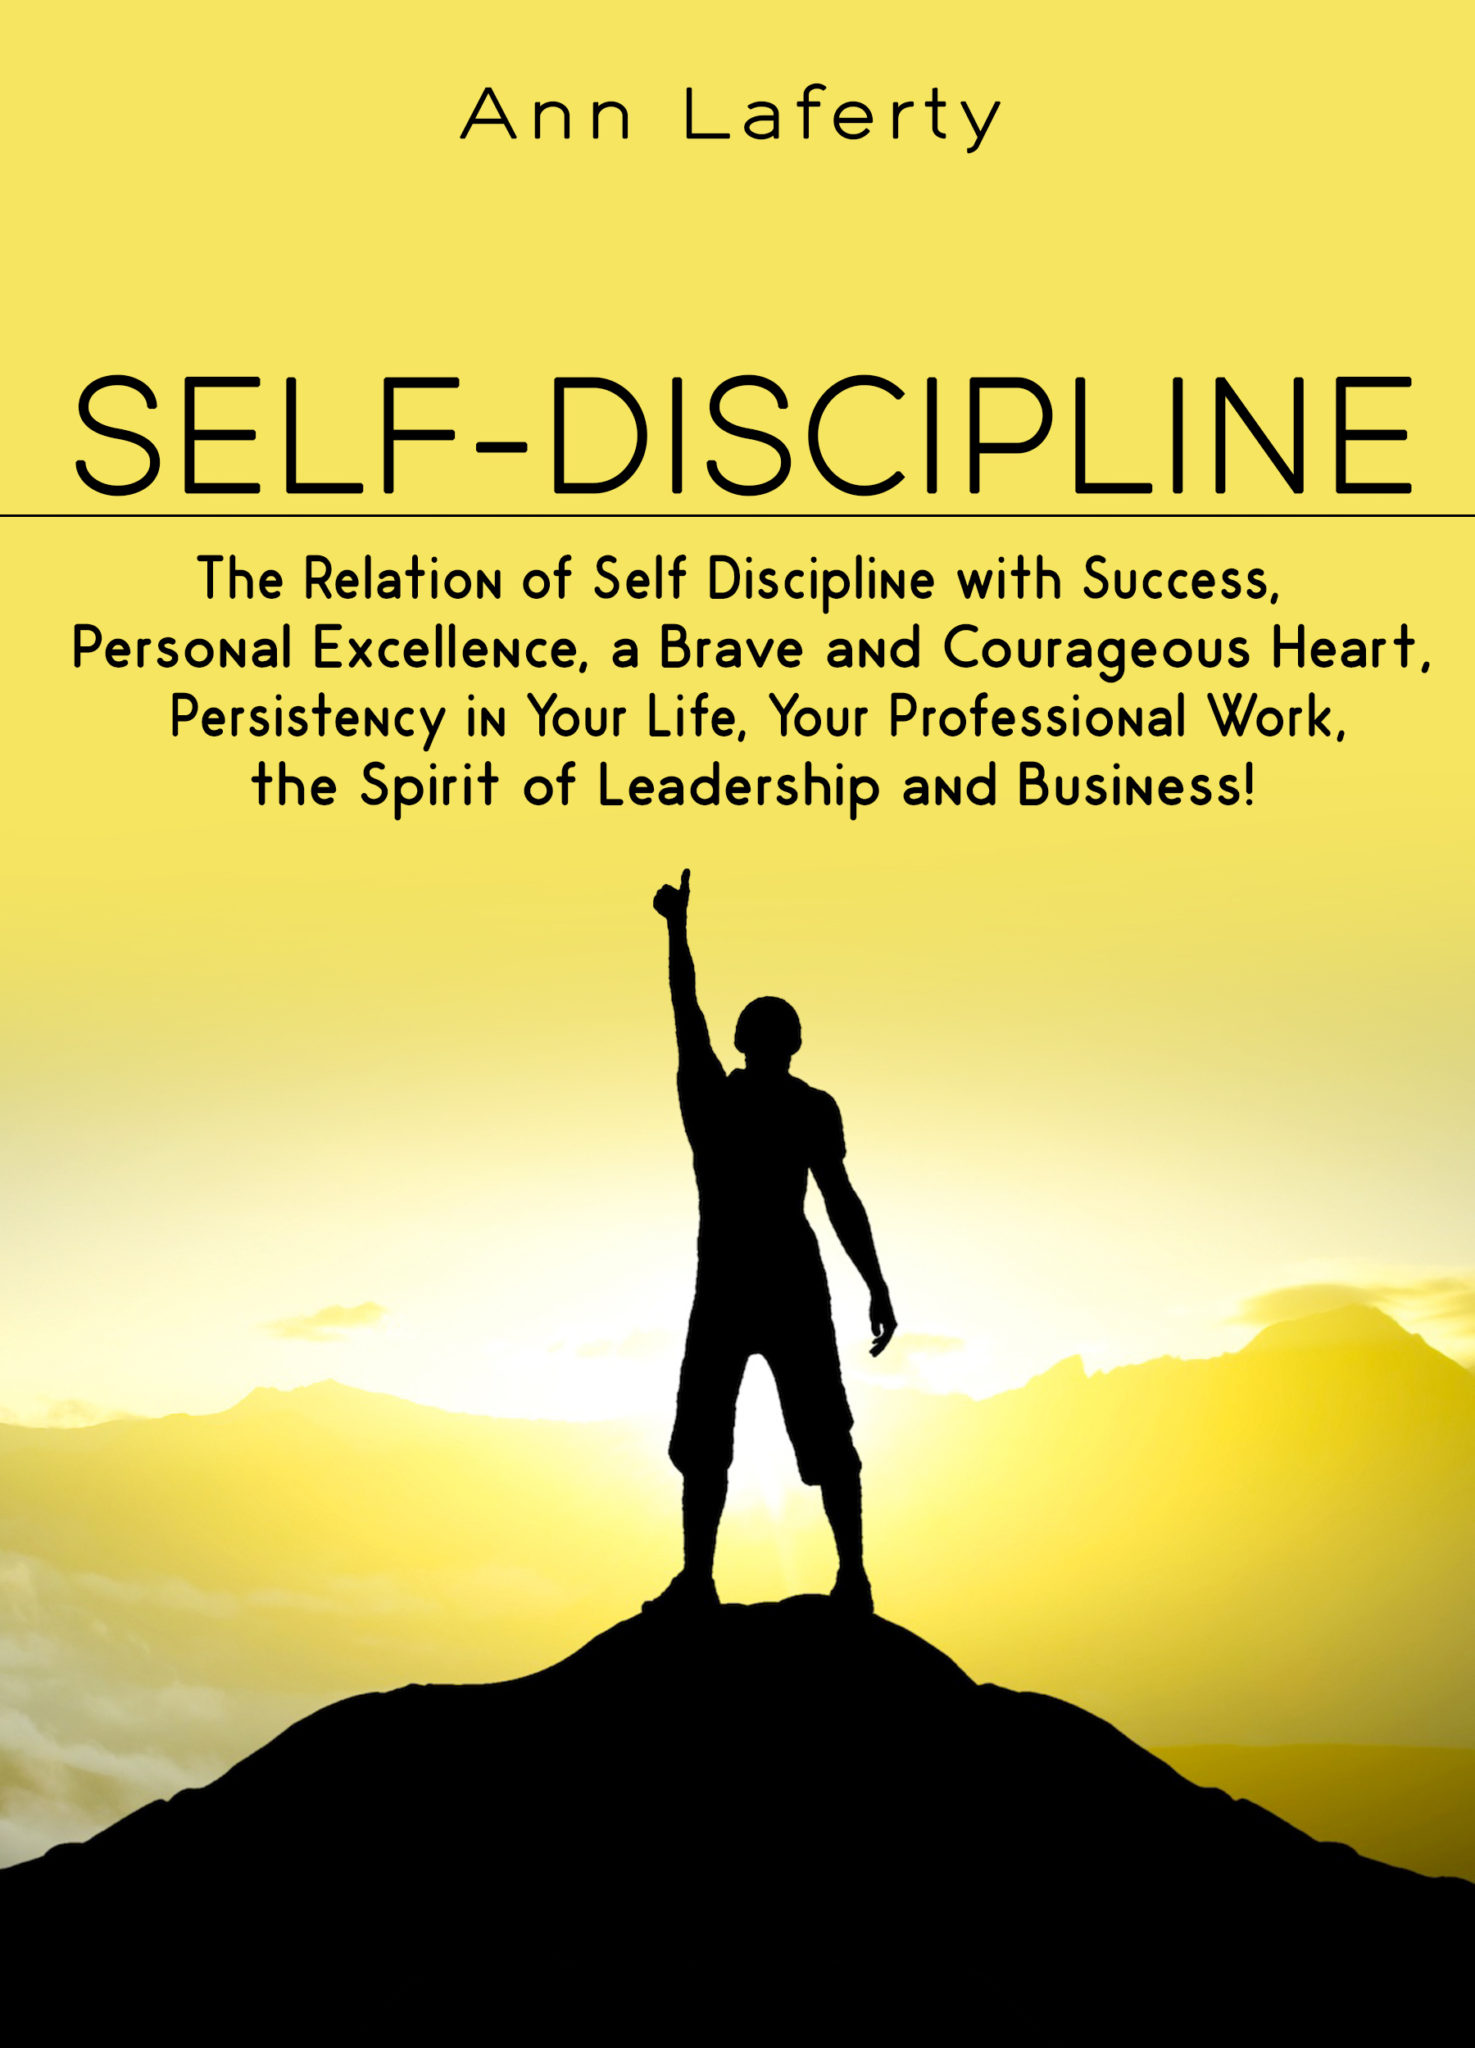 FREE: SELF-DISCIPLINE: The Relation of Self Discipline with Success, Personal Excellence, a Brave and Courageous Heart, Persistency in Your Life, Your Professional Work, the Spirit of Leadership and Business by Ann Laferty